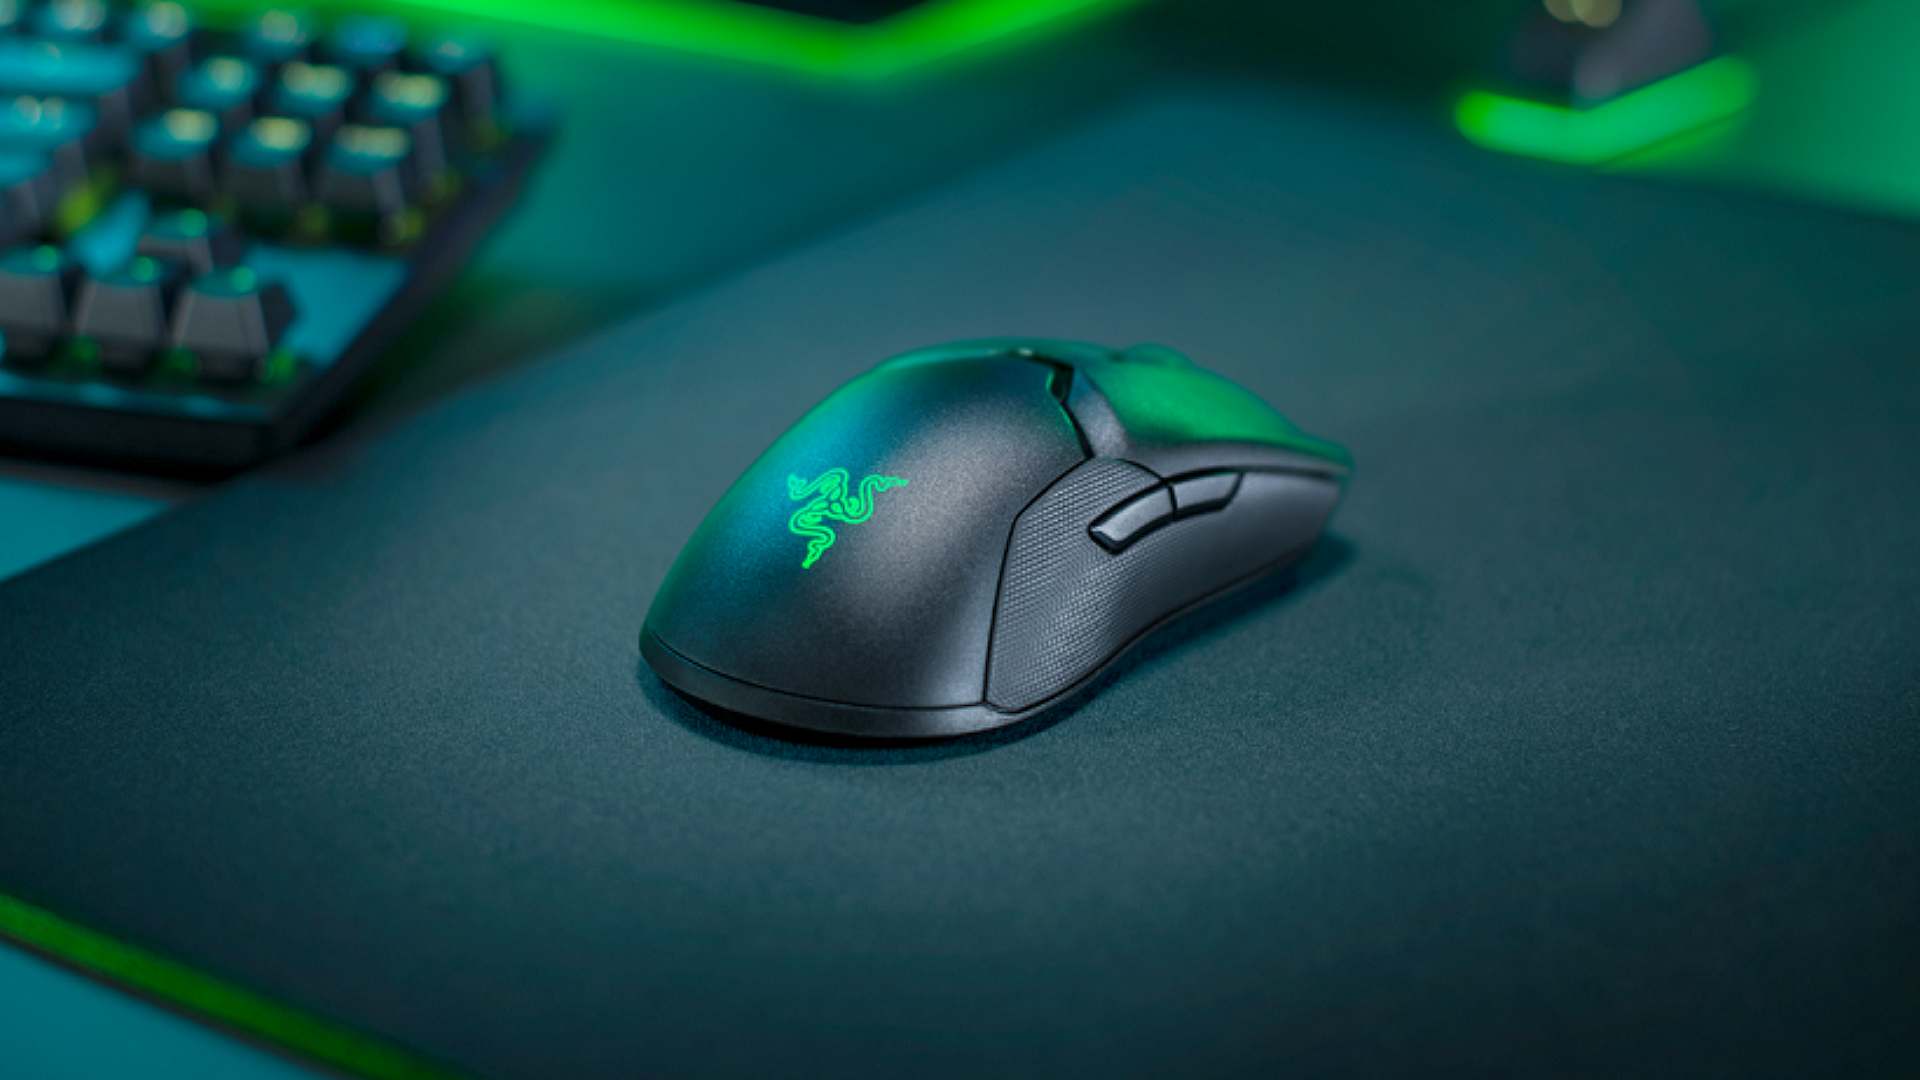 Razer’s Viper Ultimate gaming mouse is now better than half price